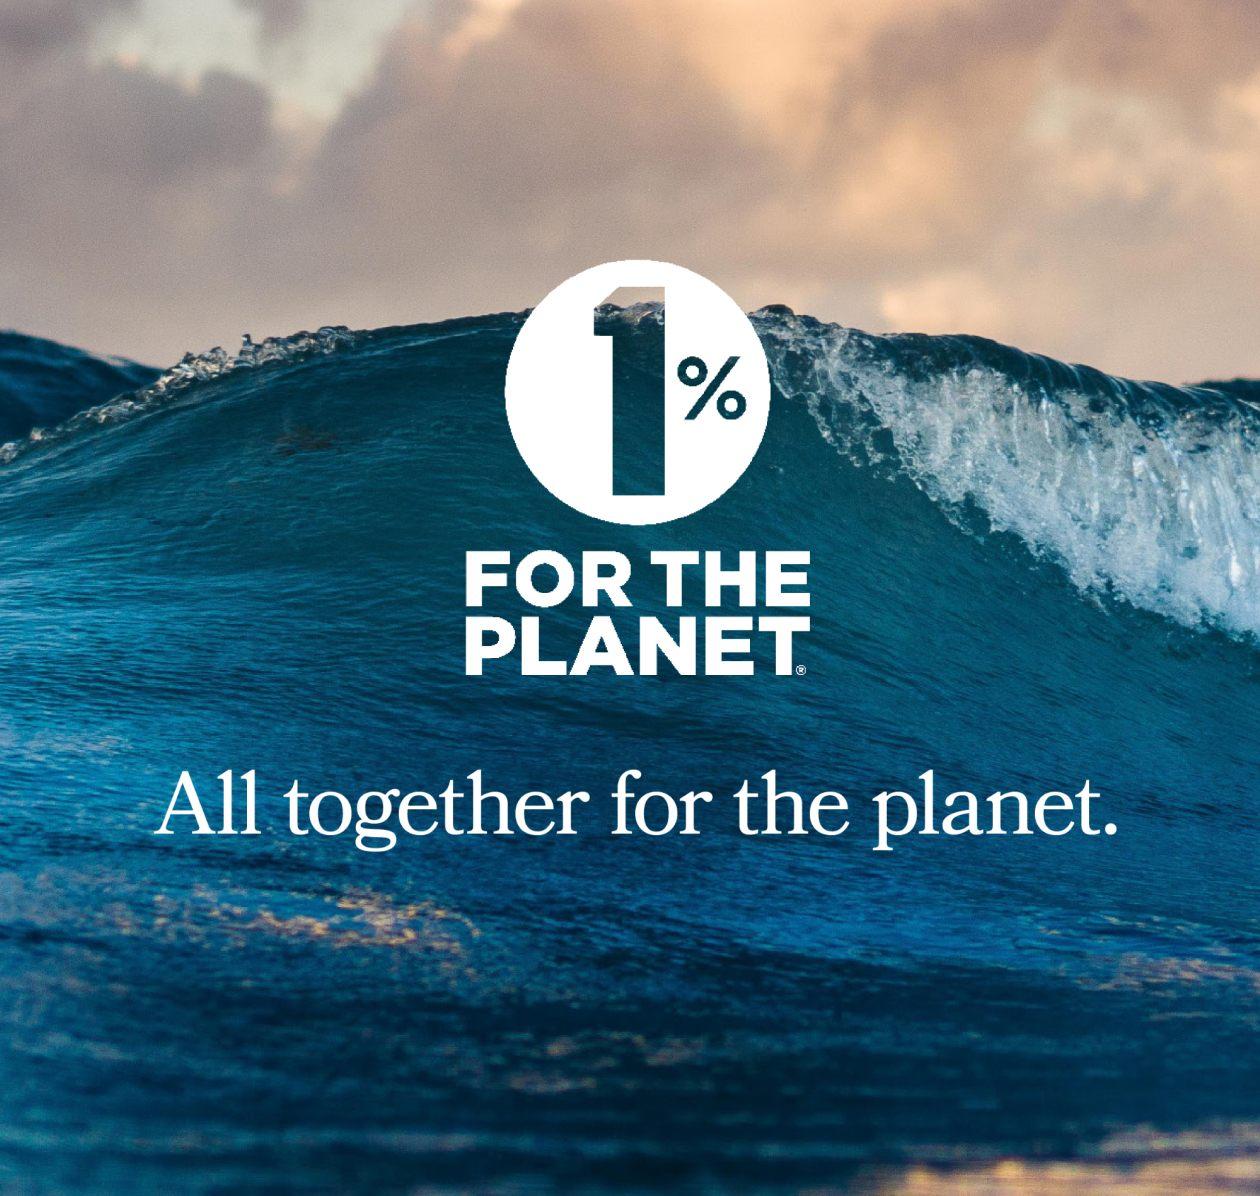 1% for the planet. All together for the planet.